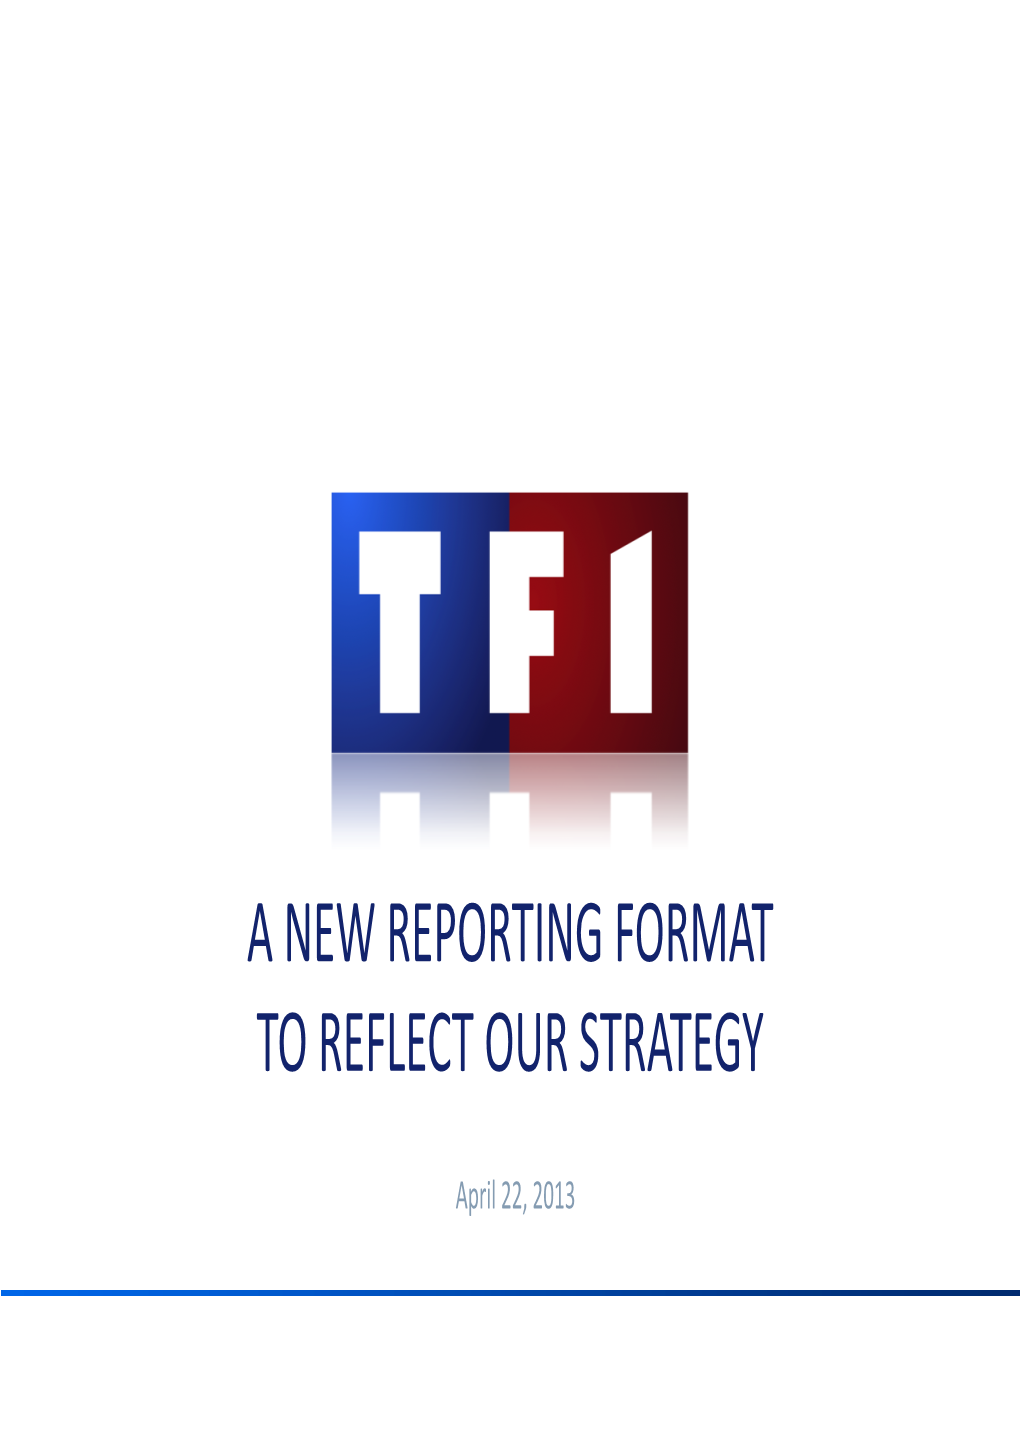 A New Reporting Format to Reflect Our Strategy